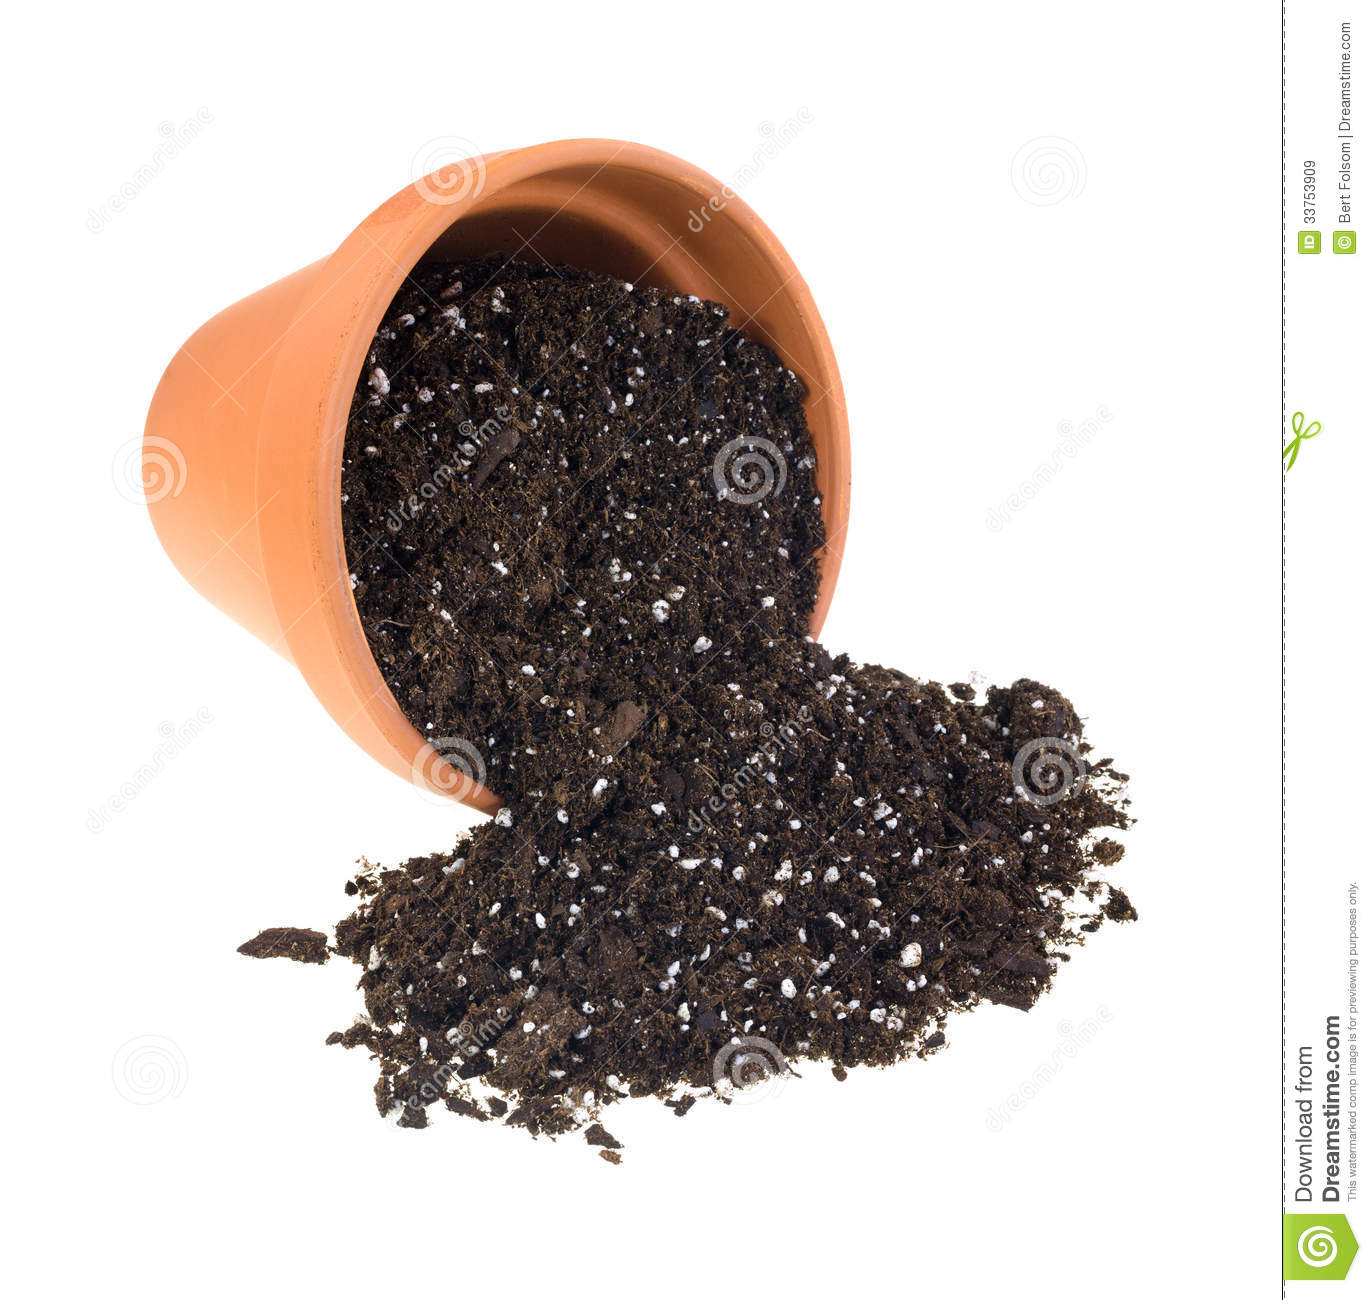 Organic Potting Soil Spilling From Cay Pot Royalty Free Stock Images